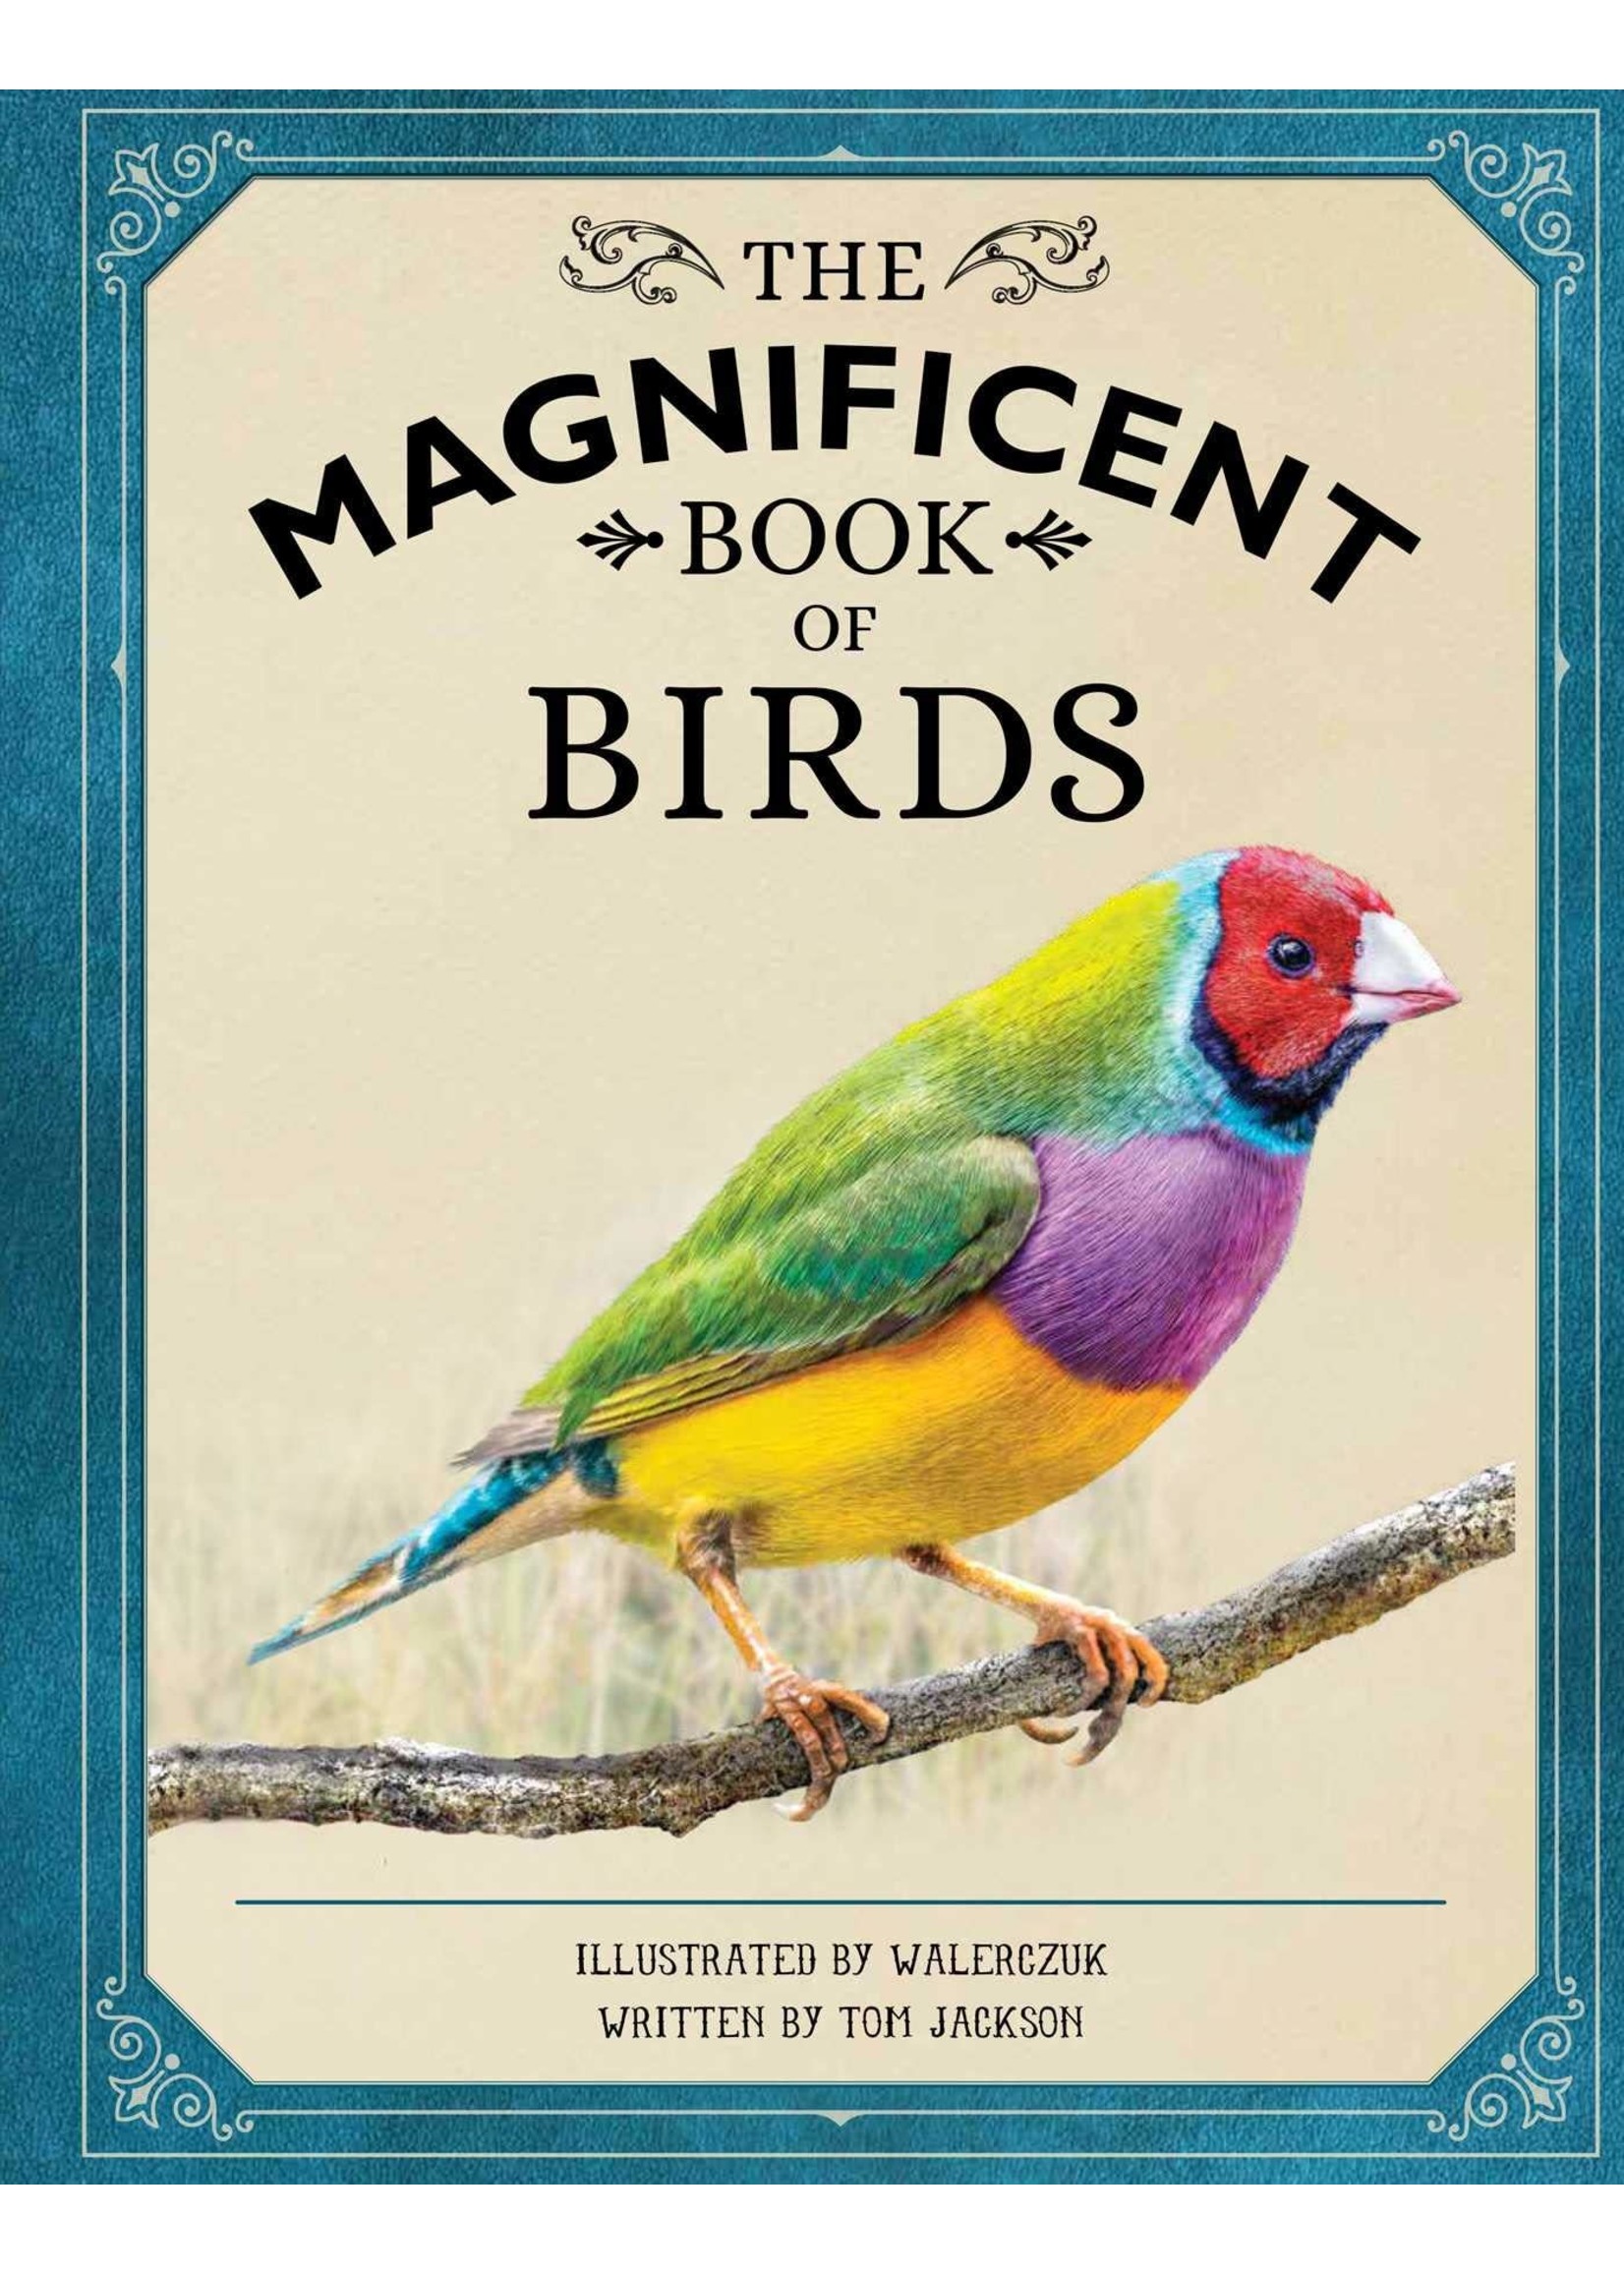 The Magnificent Book of Birds